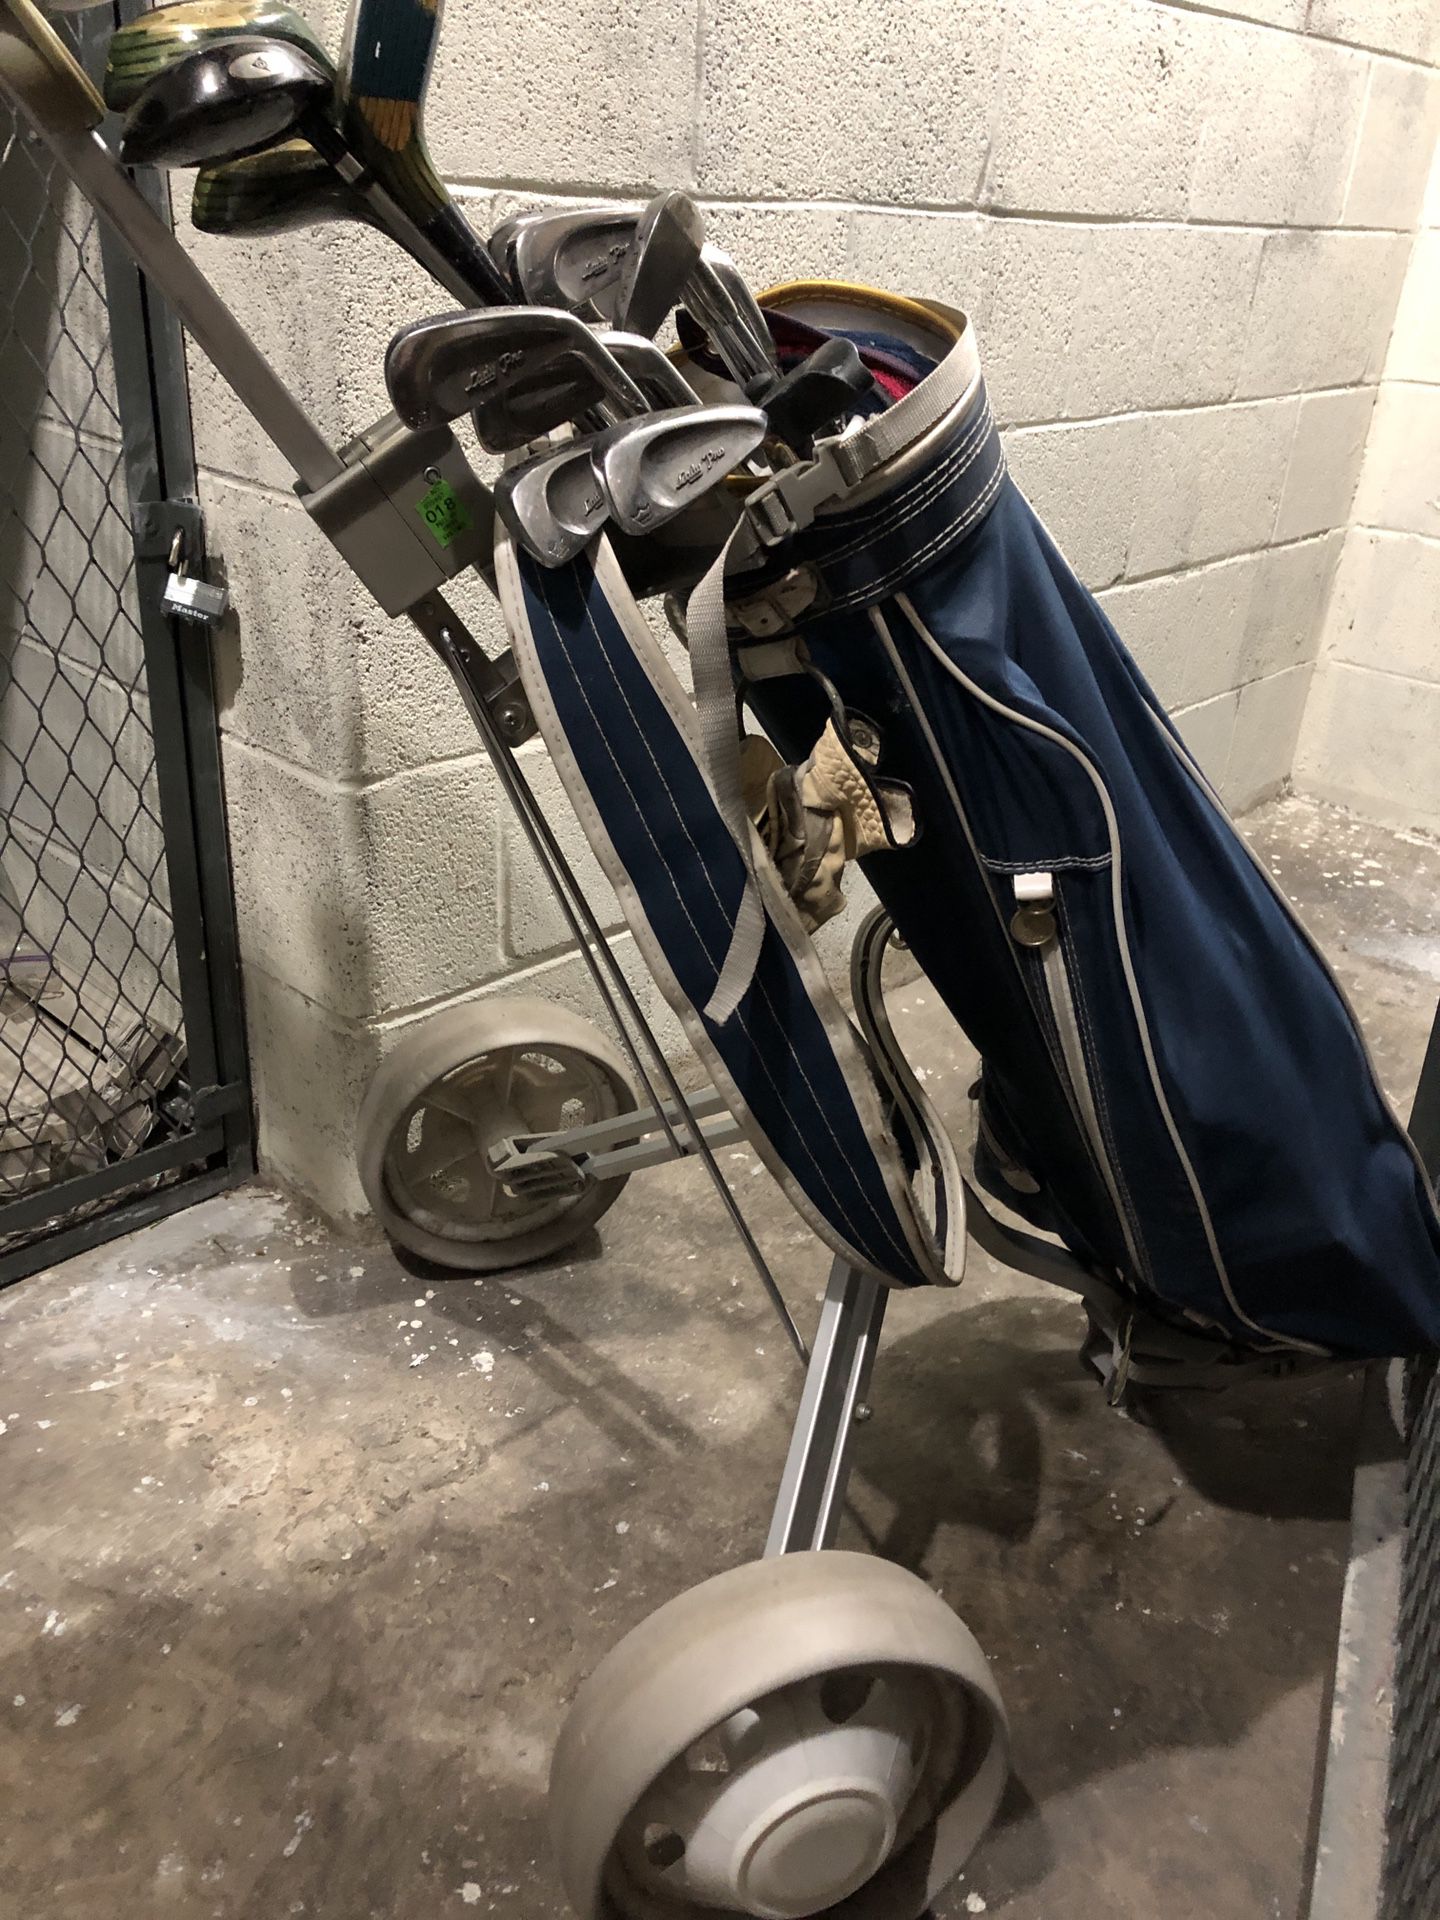 Women’s golf clubs with pull cart.